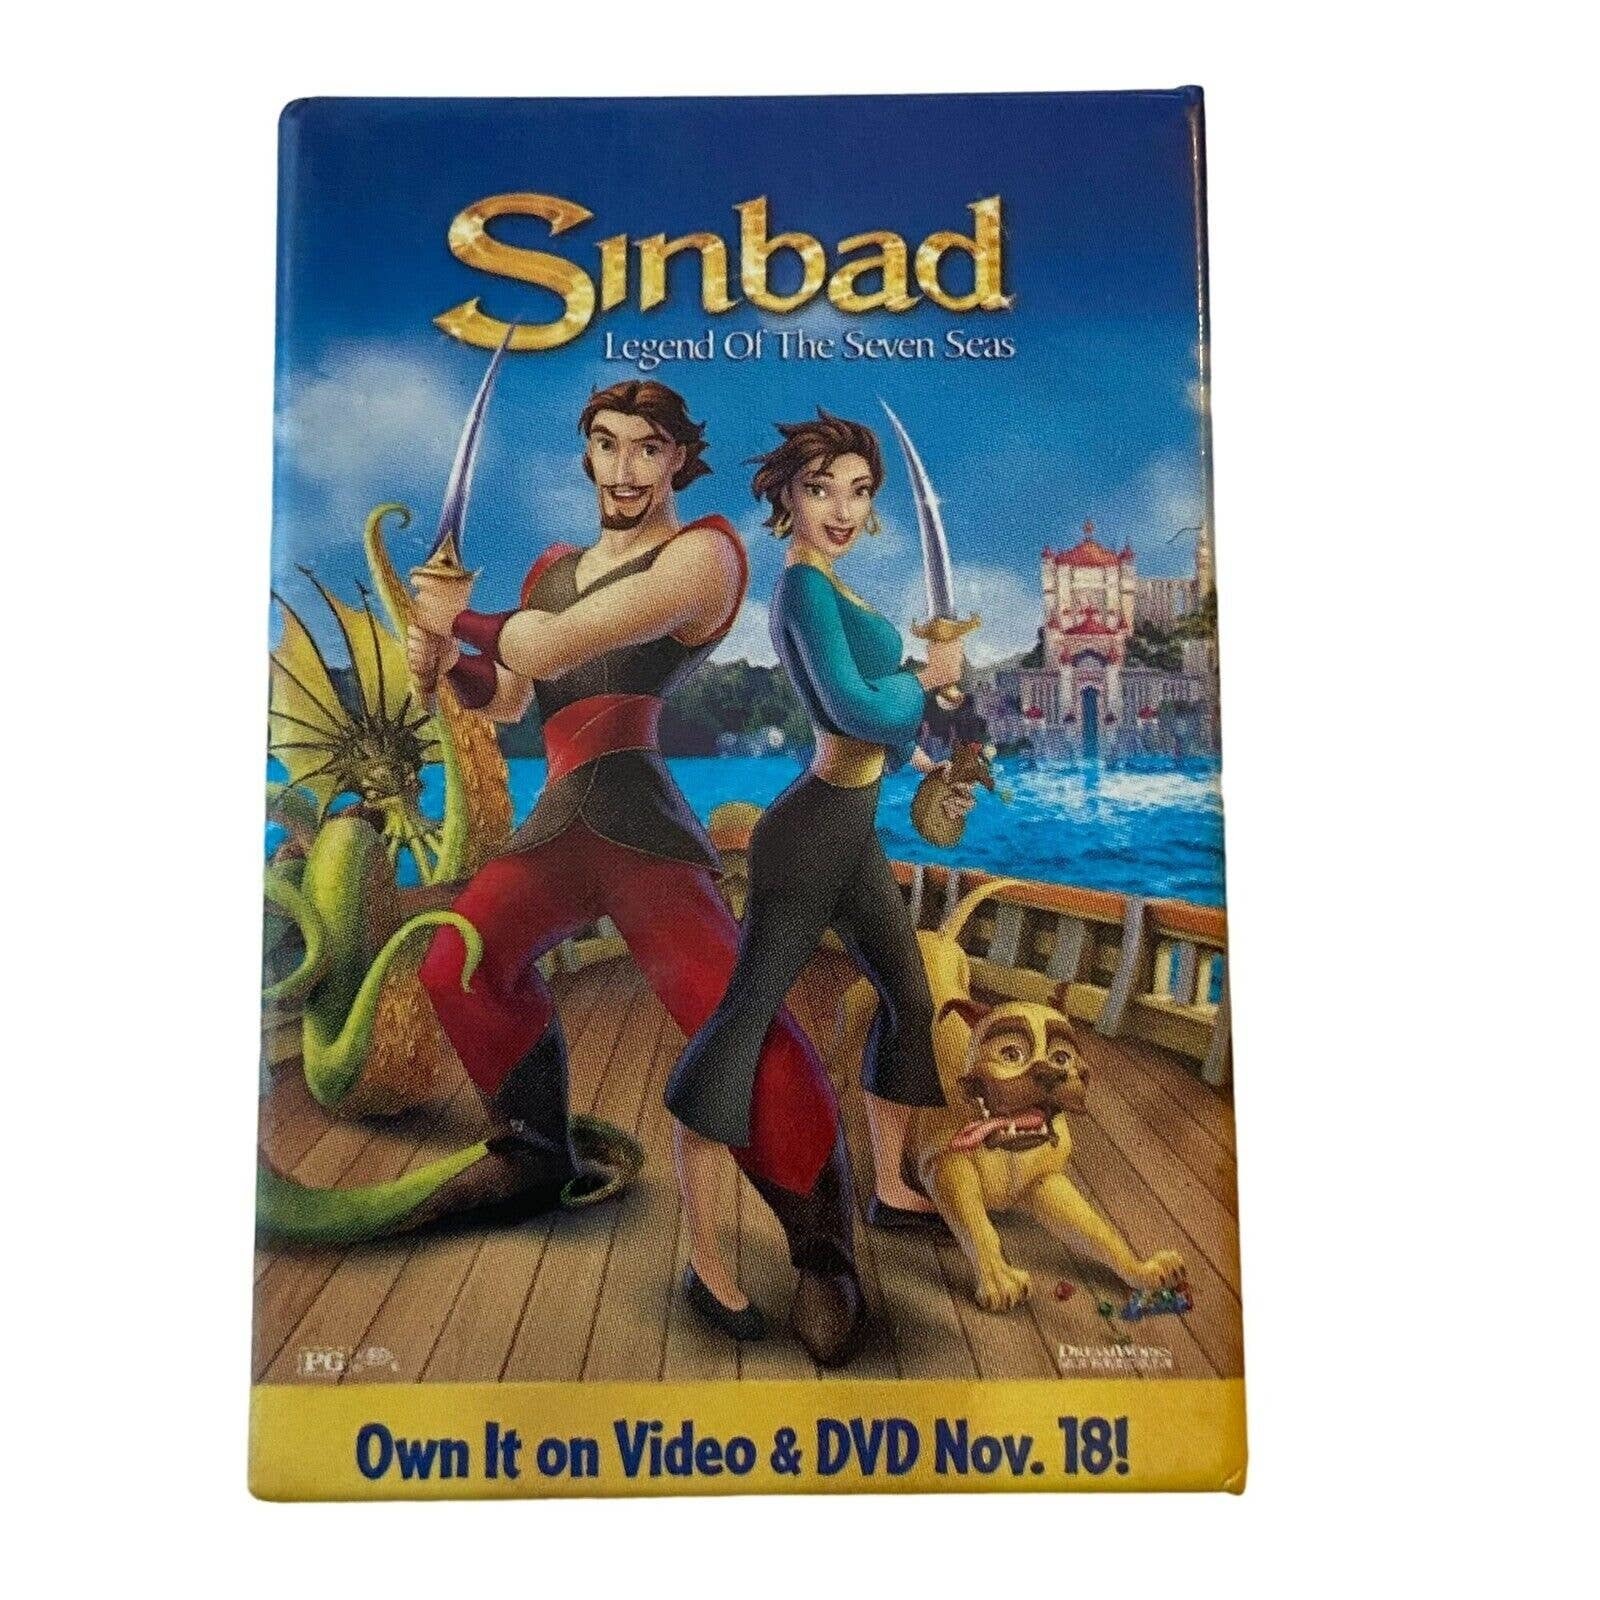 Primary image for Sinbad Pin 2003 Exclusive Advertising Promotional Pinback Button Vintage